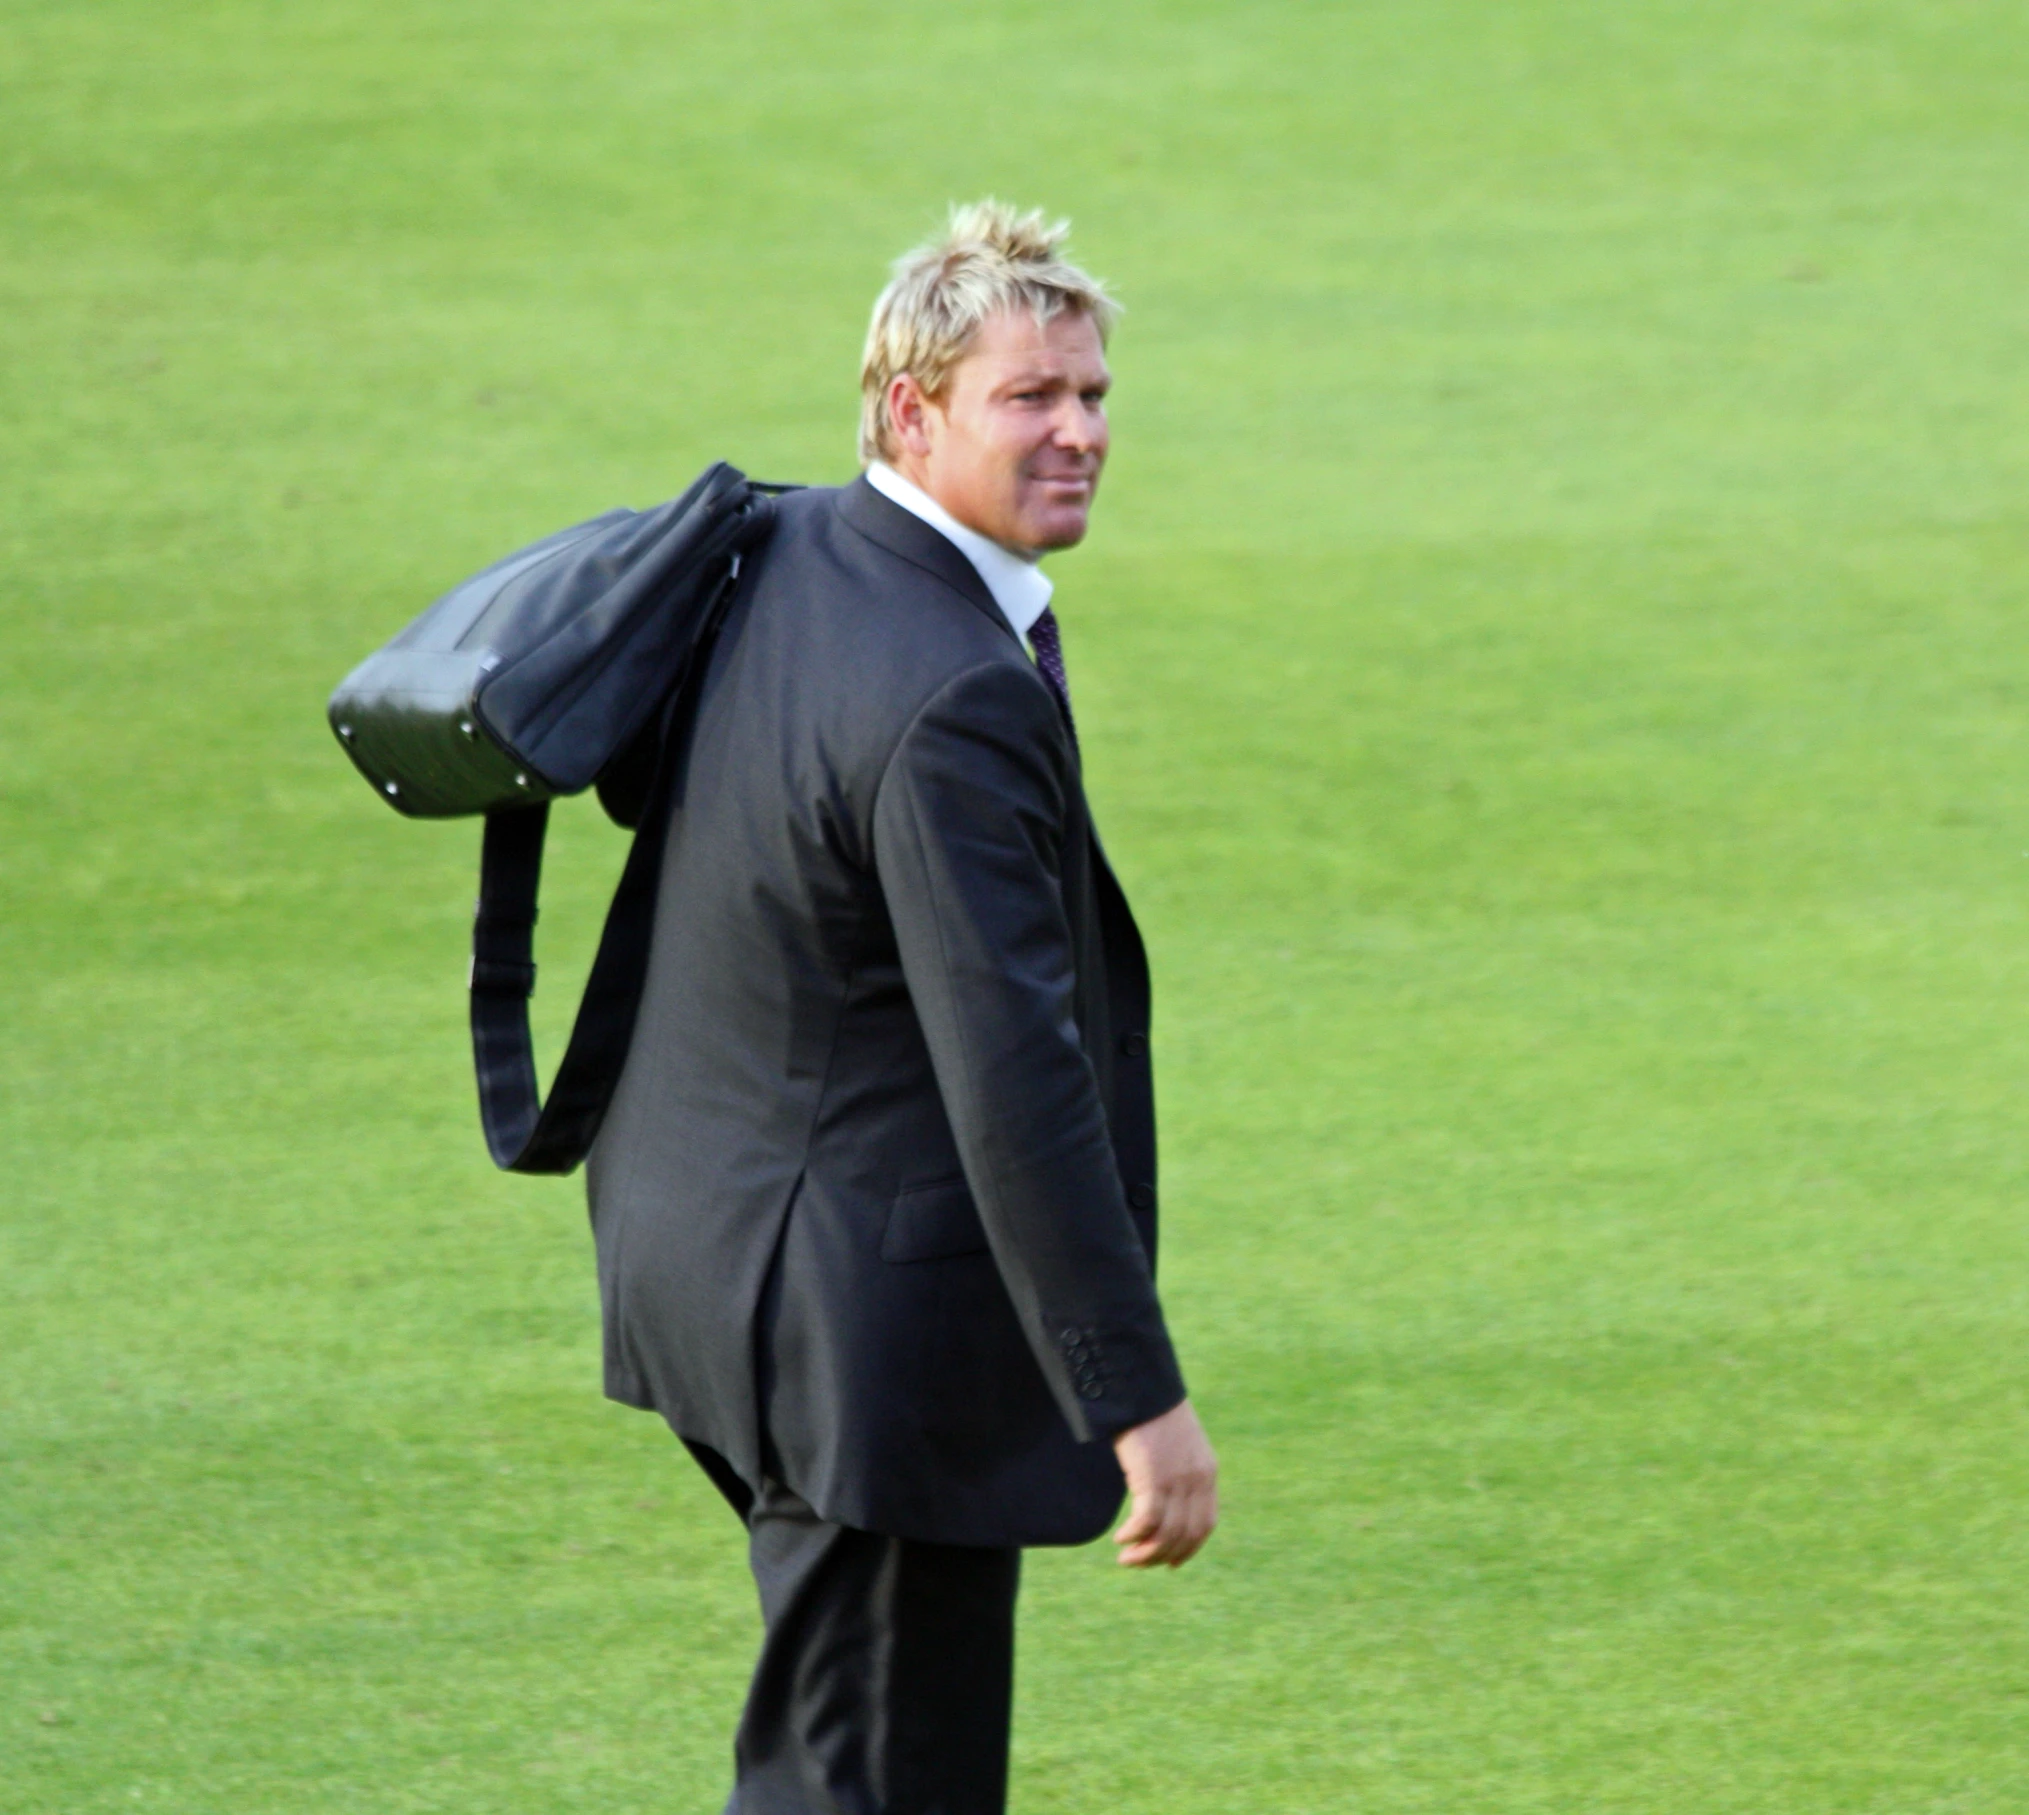 a man in black suit carrying a bag walking on green grass